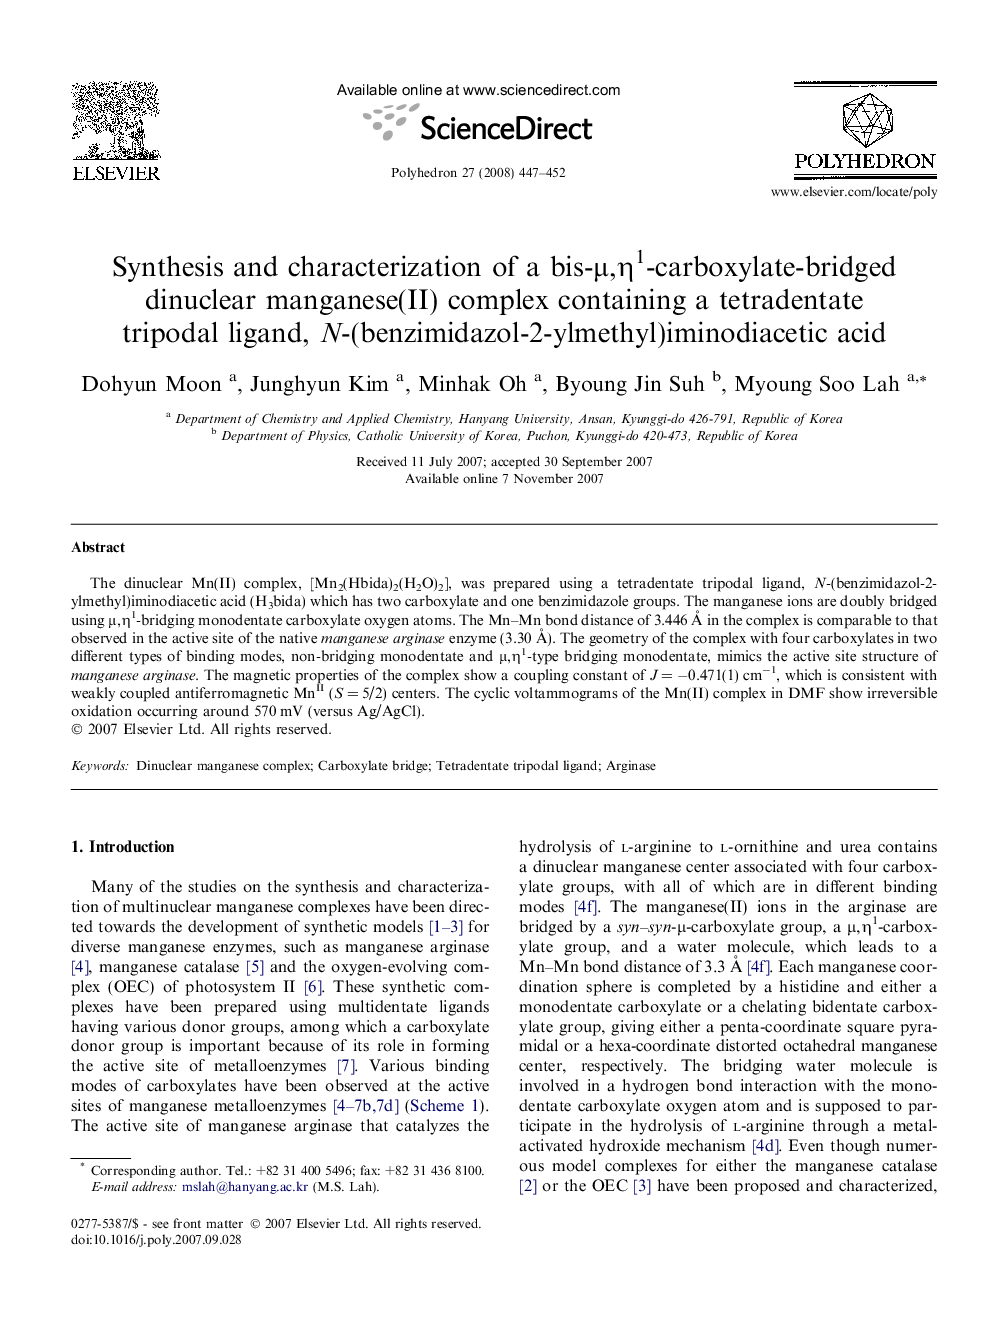 Synthesis and characterization of a bis-μ,η1-carboxylate-bridged dinuclear manganese(II) complex containing a tetradentate tripodal ligand, N-(benzimidazol-2-ylmethyl)iminodiacetic acid